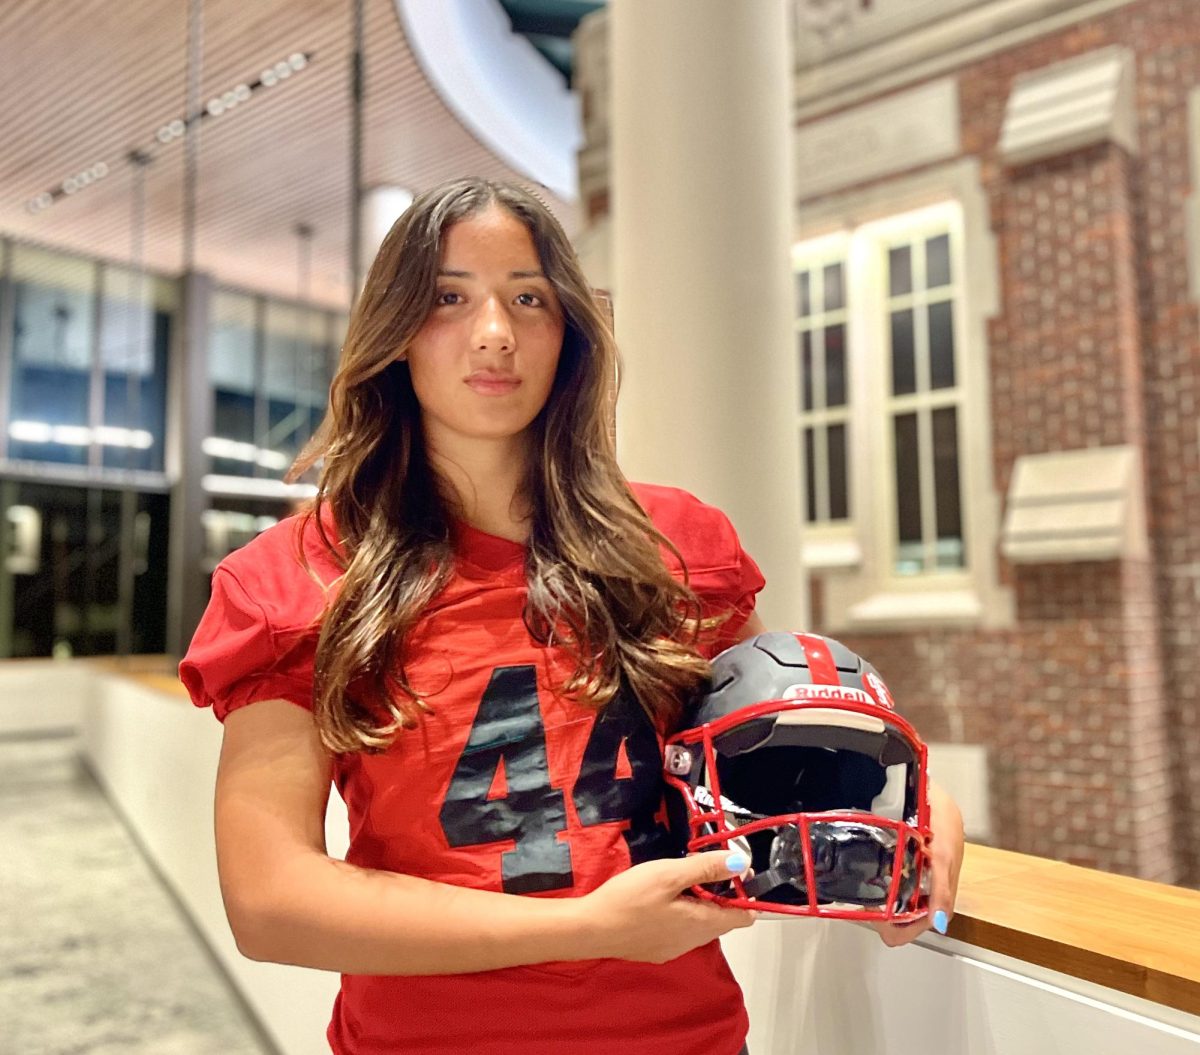 Juniper+Schwartzman+%6027+joined+the+football+team+as+a+kicker.+She+became+the+first+woman+to+play+and+score+for+the+team+during+their+Sept.+30+game+against+Lawrence+University.